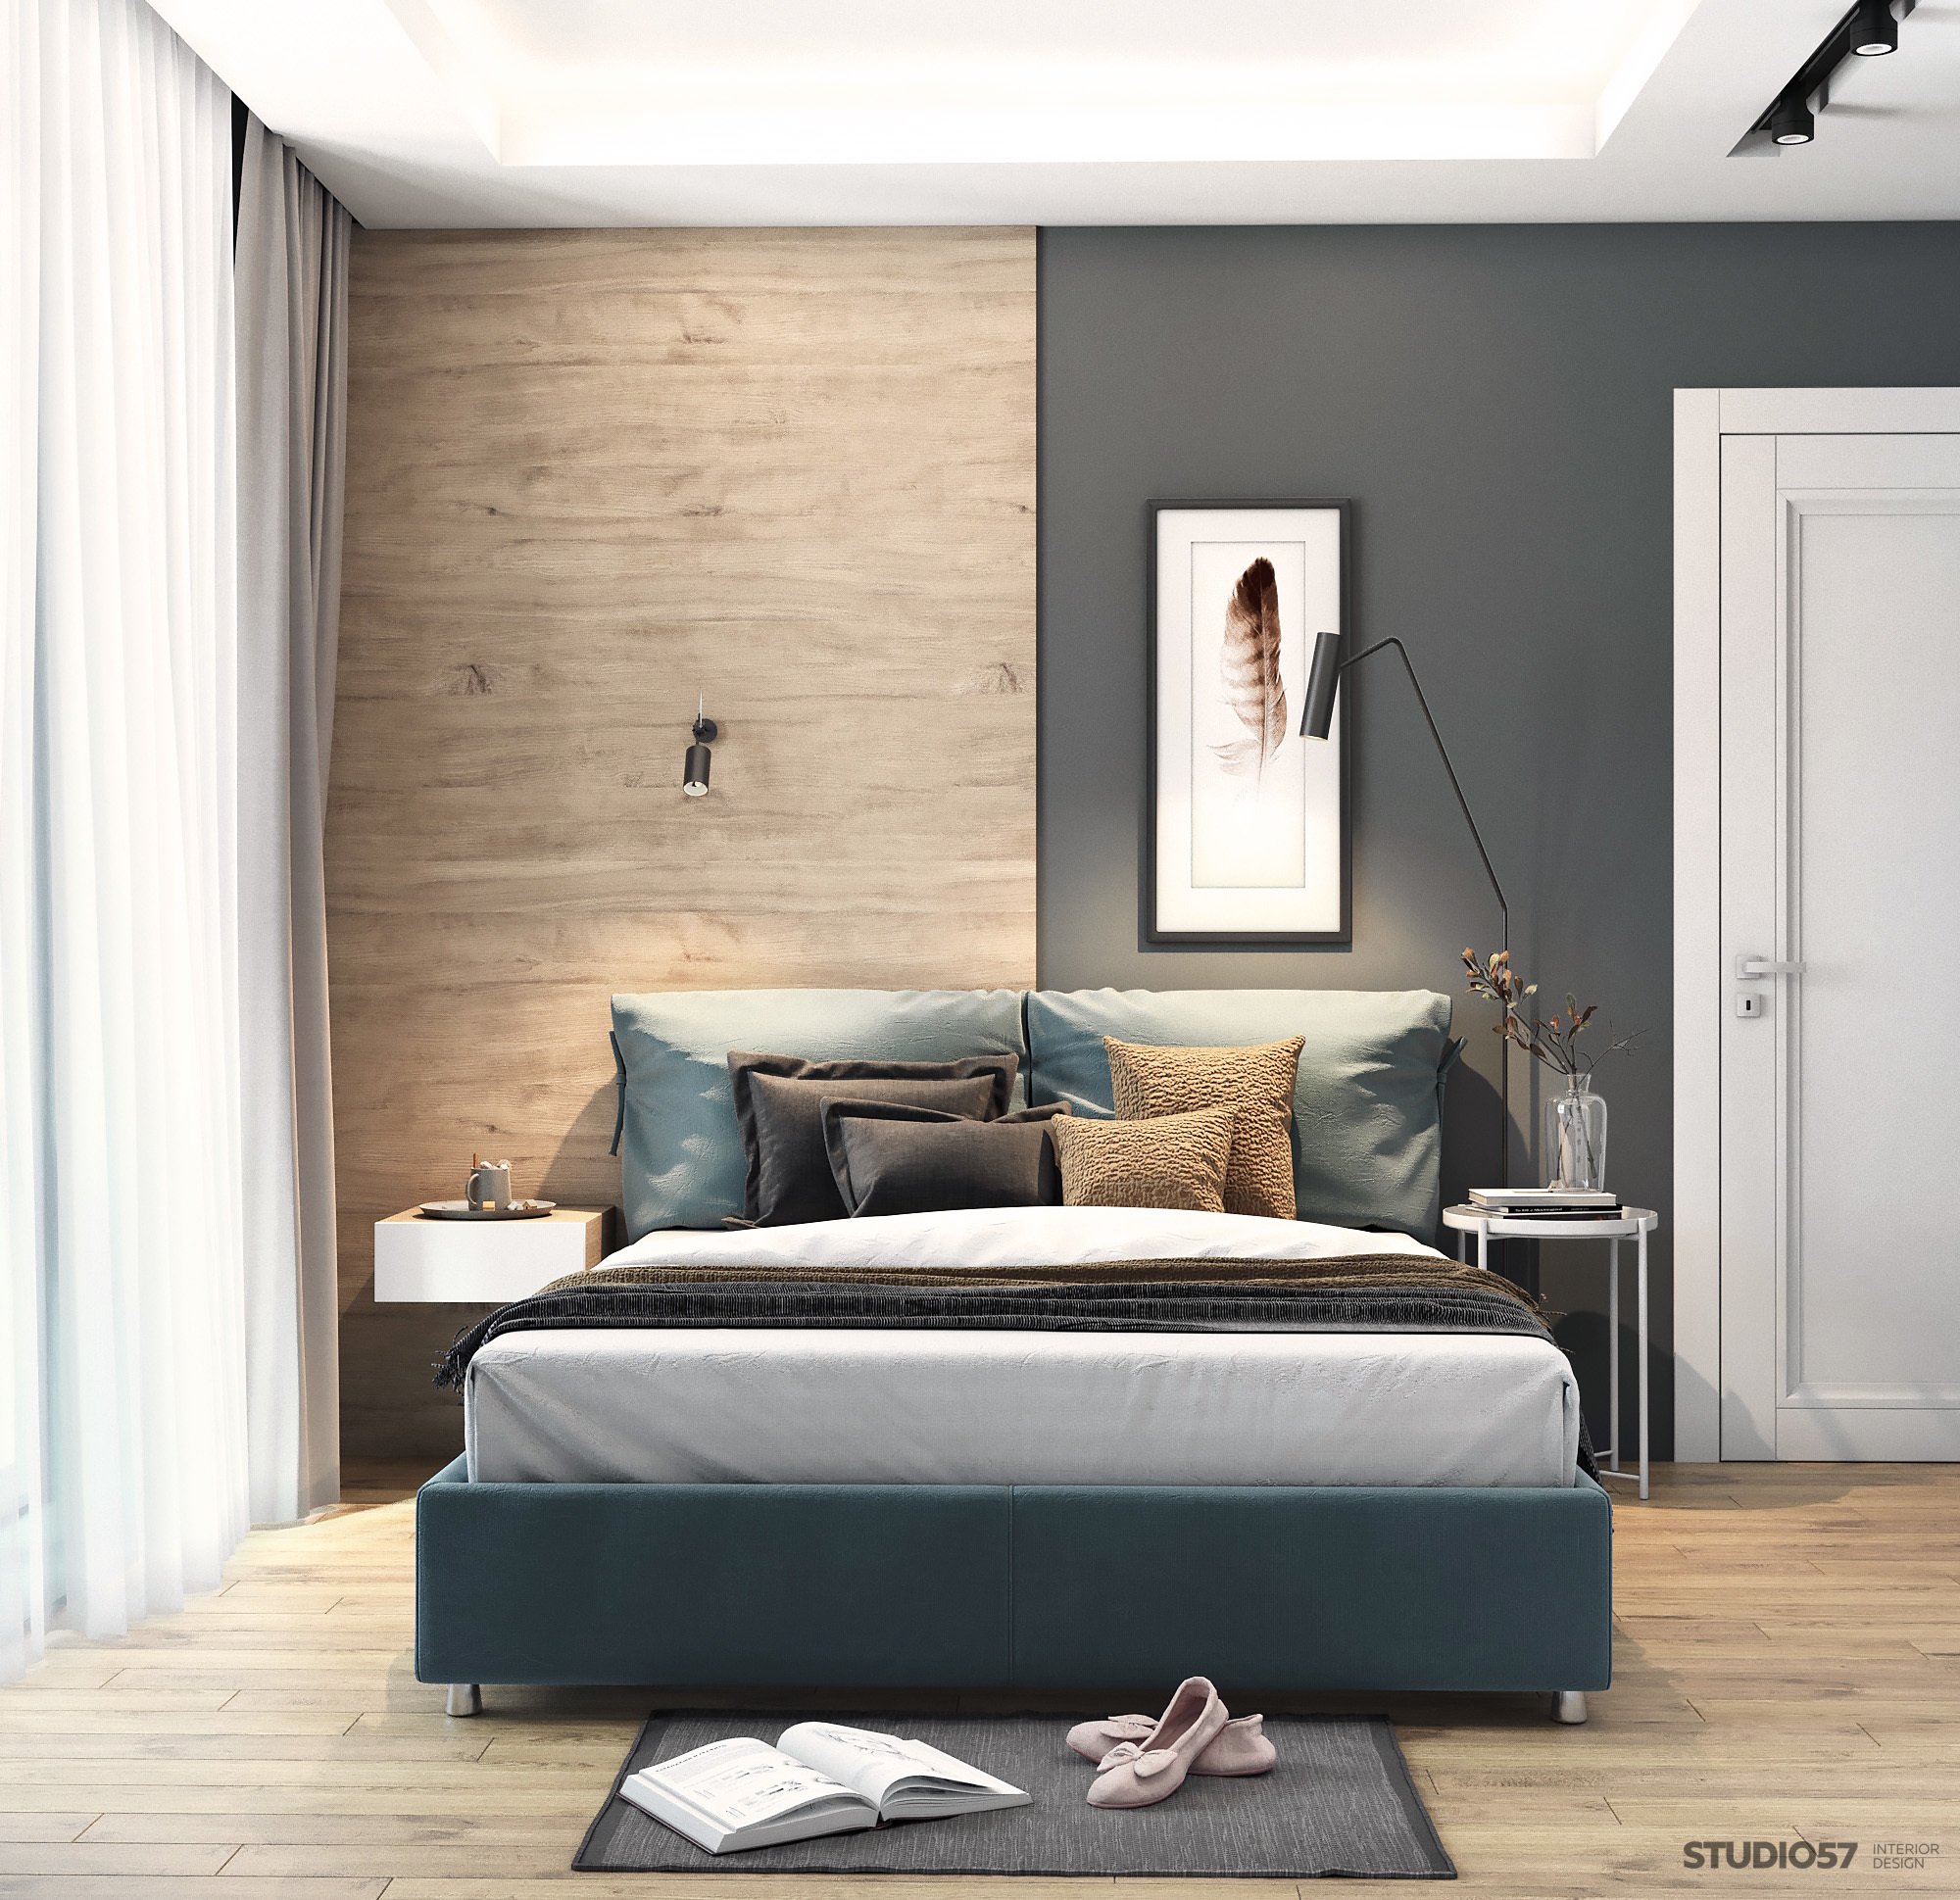 How to make a bedroom in the style of Contemporary